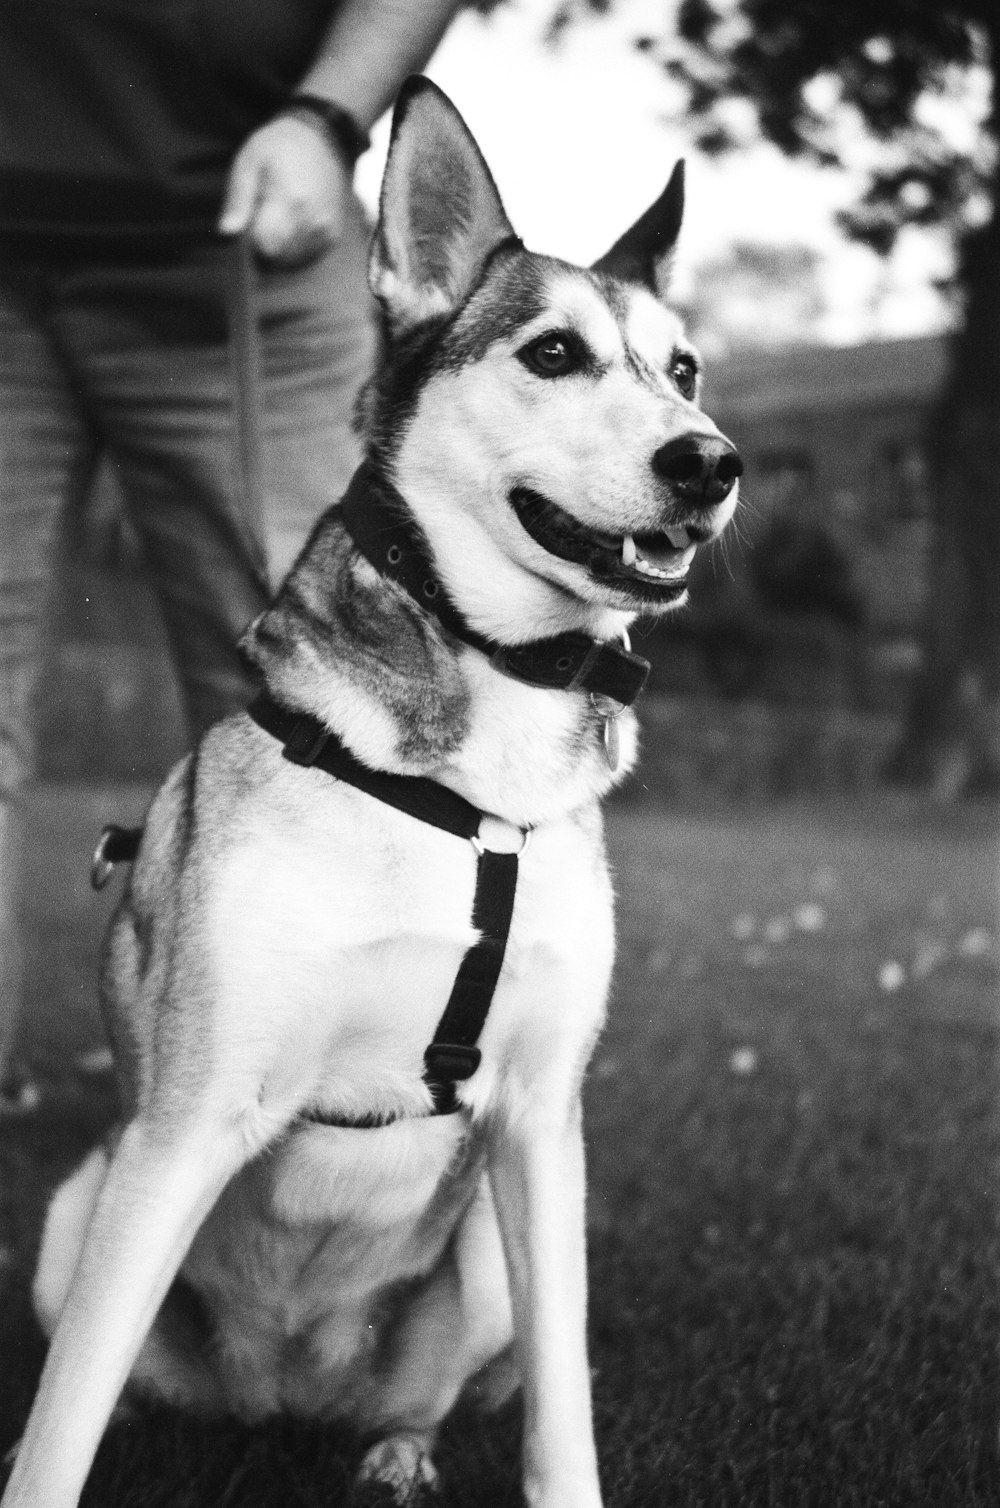 a black and white photo of a dog wearing a harness